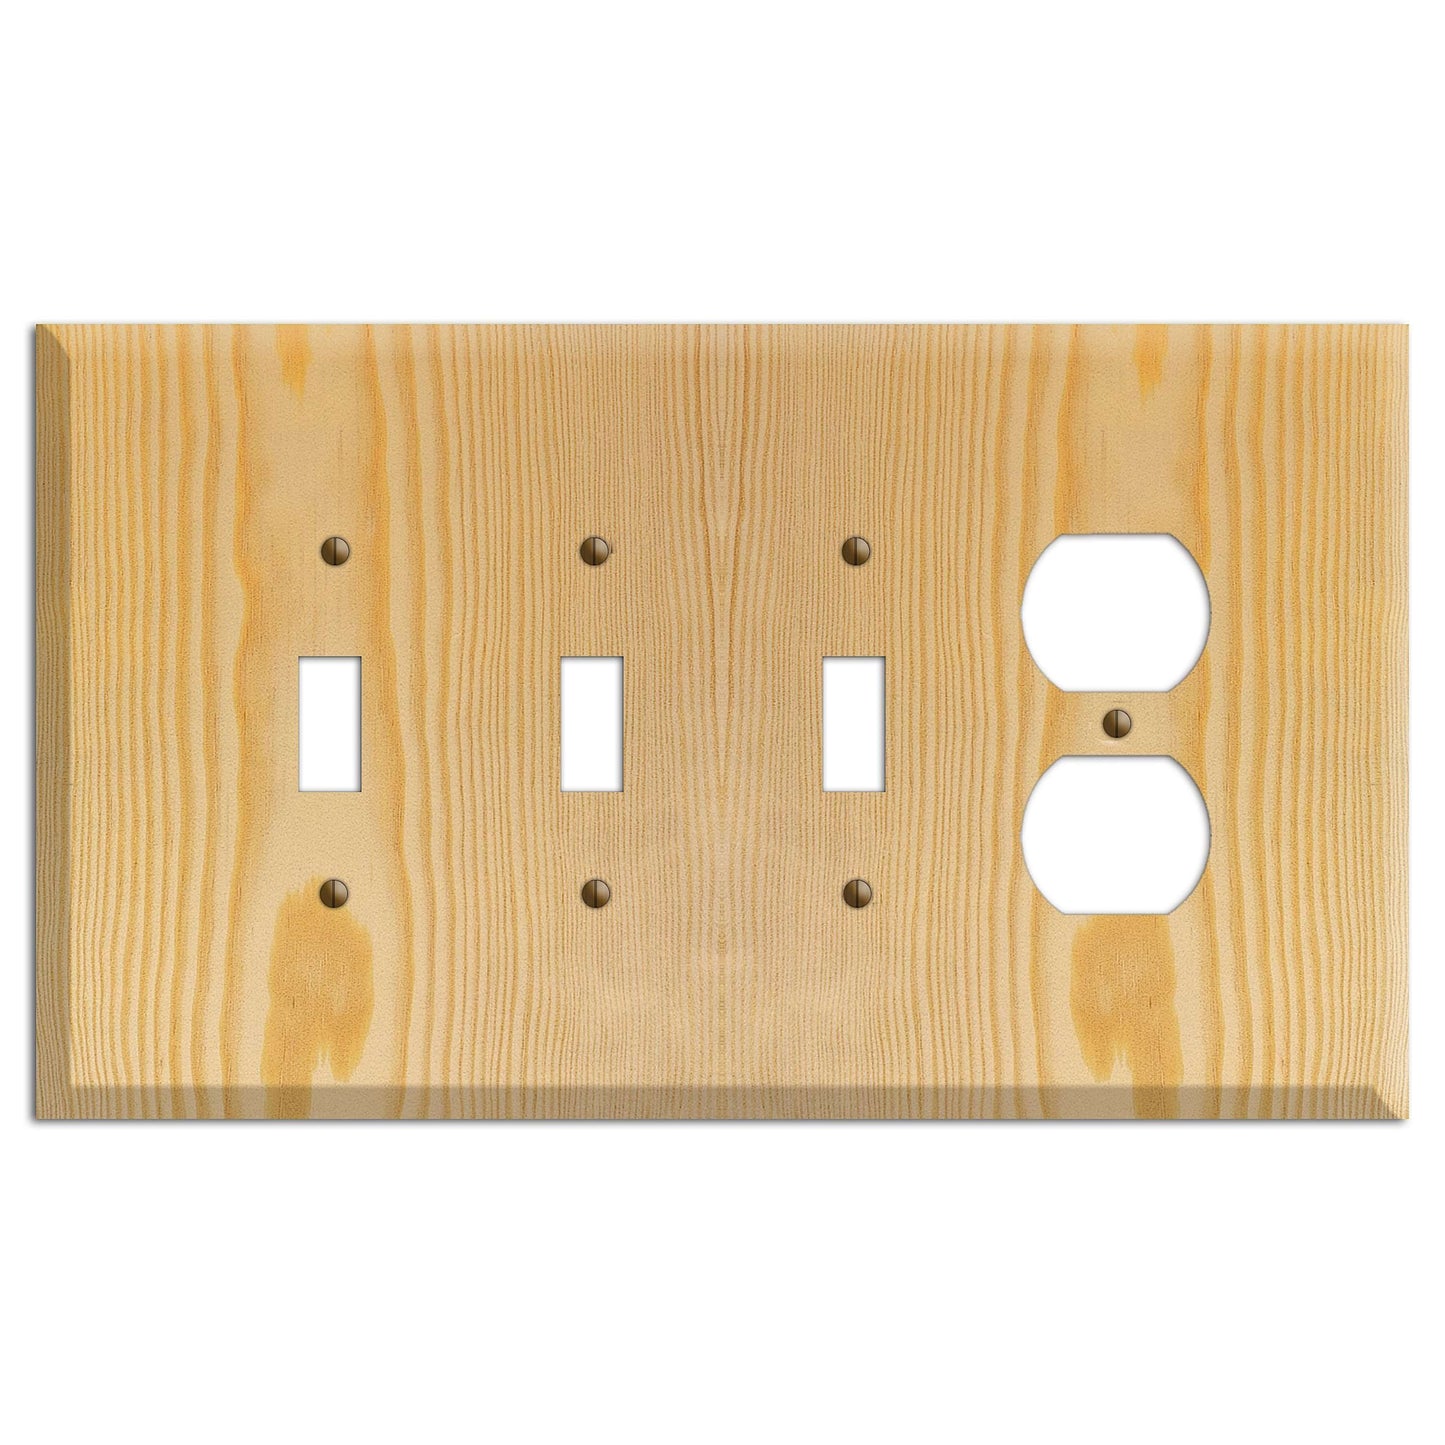 Pine Wood 3 Toggle / Duplex Outlet Cover Plate:Wallplates.com